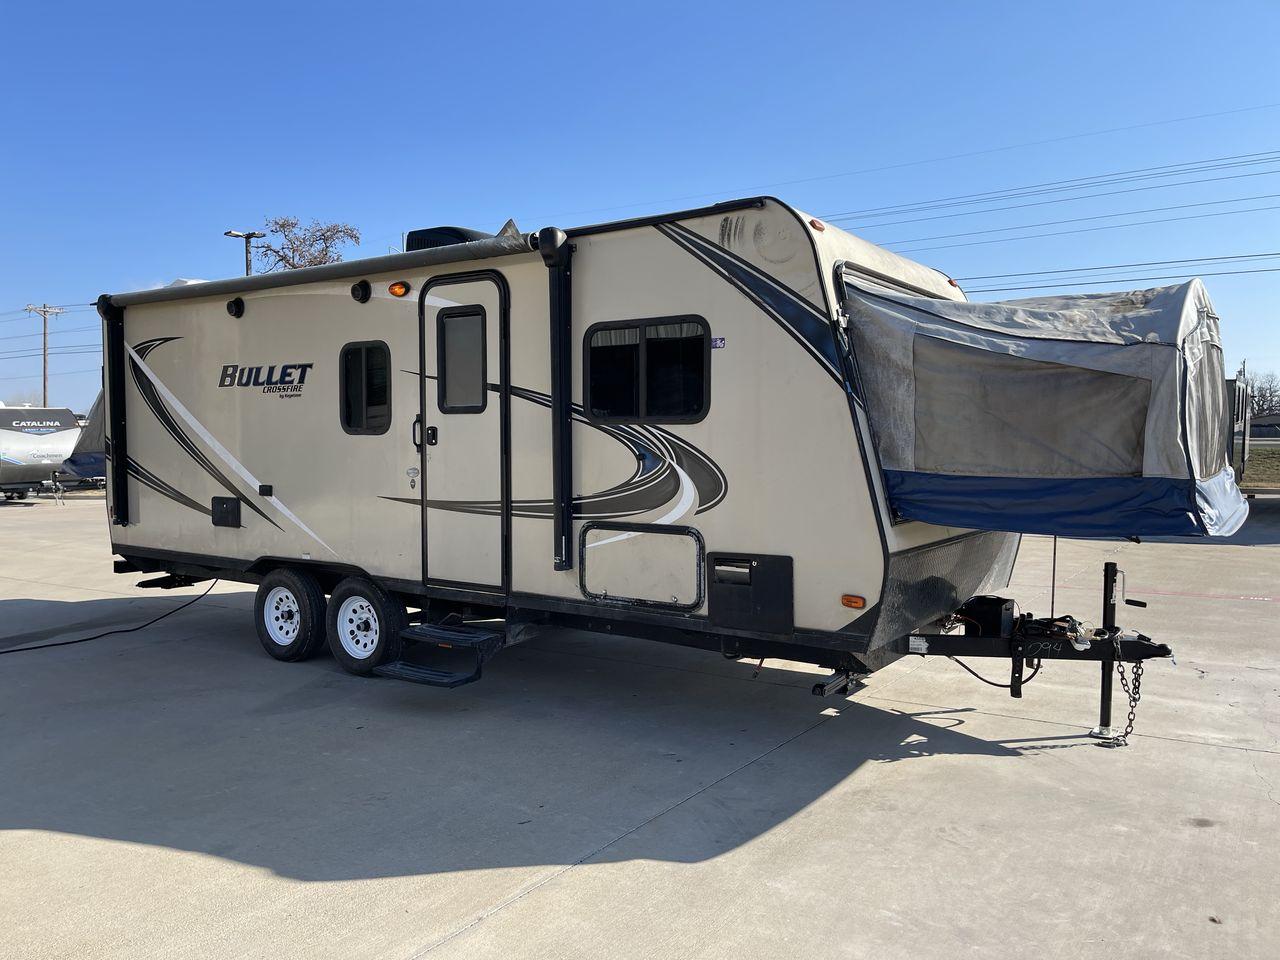 2018 BULLET CROSSFIRE 2190EX (4YDT21923JT) , Length: 25.08 ft. | Dry Weight: 4,410 lbs. | Gross Weight: 6,300 lbs. | Slides: 1 transmission, located at 4319 N Main St, Cleburne, TX, 76033, (817) 678-5133, 32.385960, -97.391212 - The 2018 Bullet Crossfire 2190EX is a lightweight vacation trailer that can be used for a variety of activities. This trailer is 25.08 feet long and weighs 4,410 pounds dry. It is easy to pull and move, which makes it great for both short trips and longer vacations. Even though it's small, the Cross - Photo #23